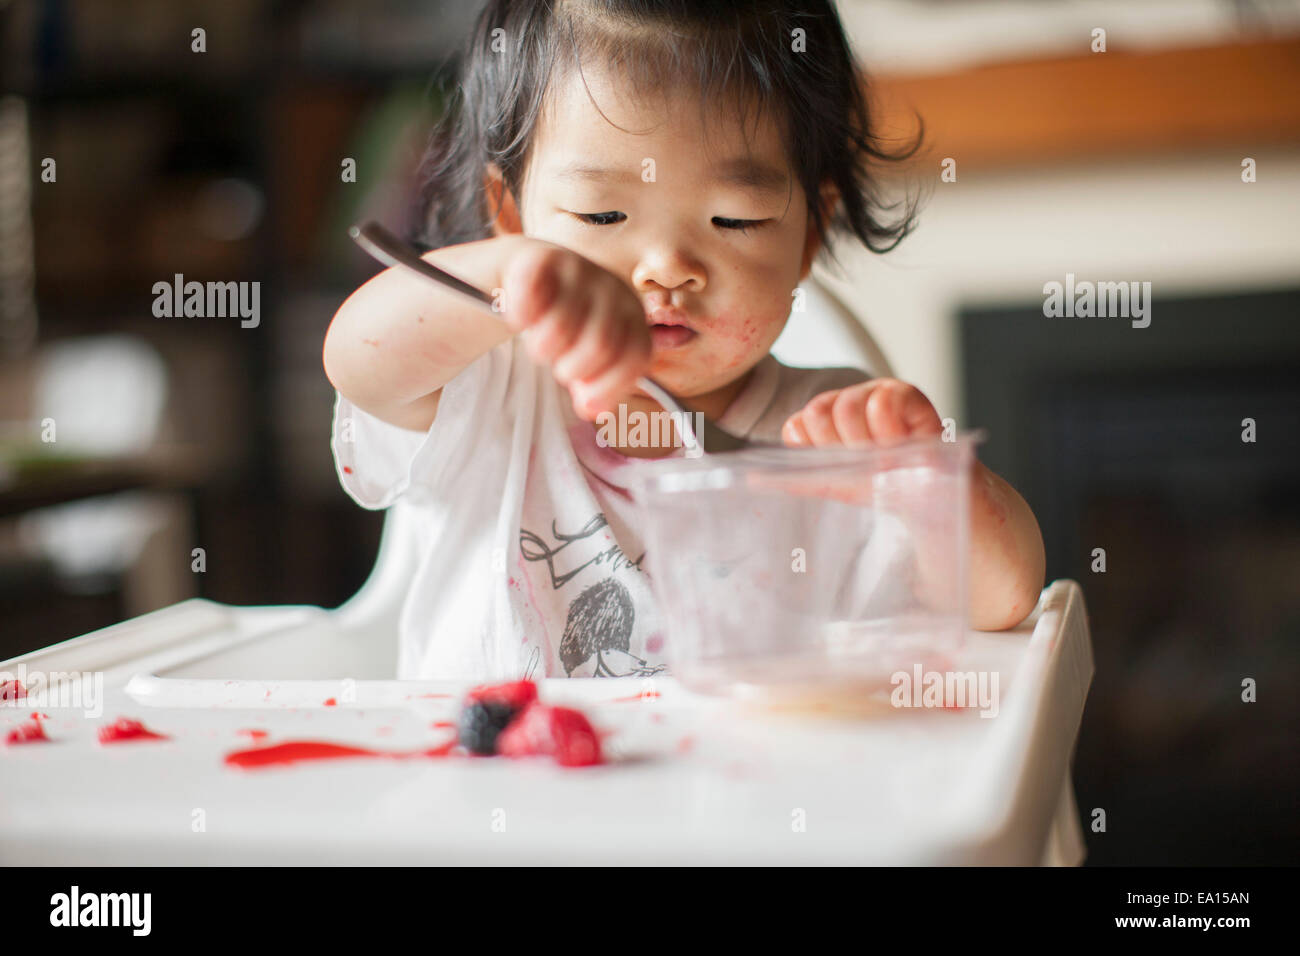 One year old baby girl eating fruit in highchair Stock Photo